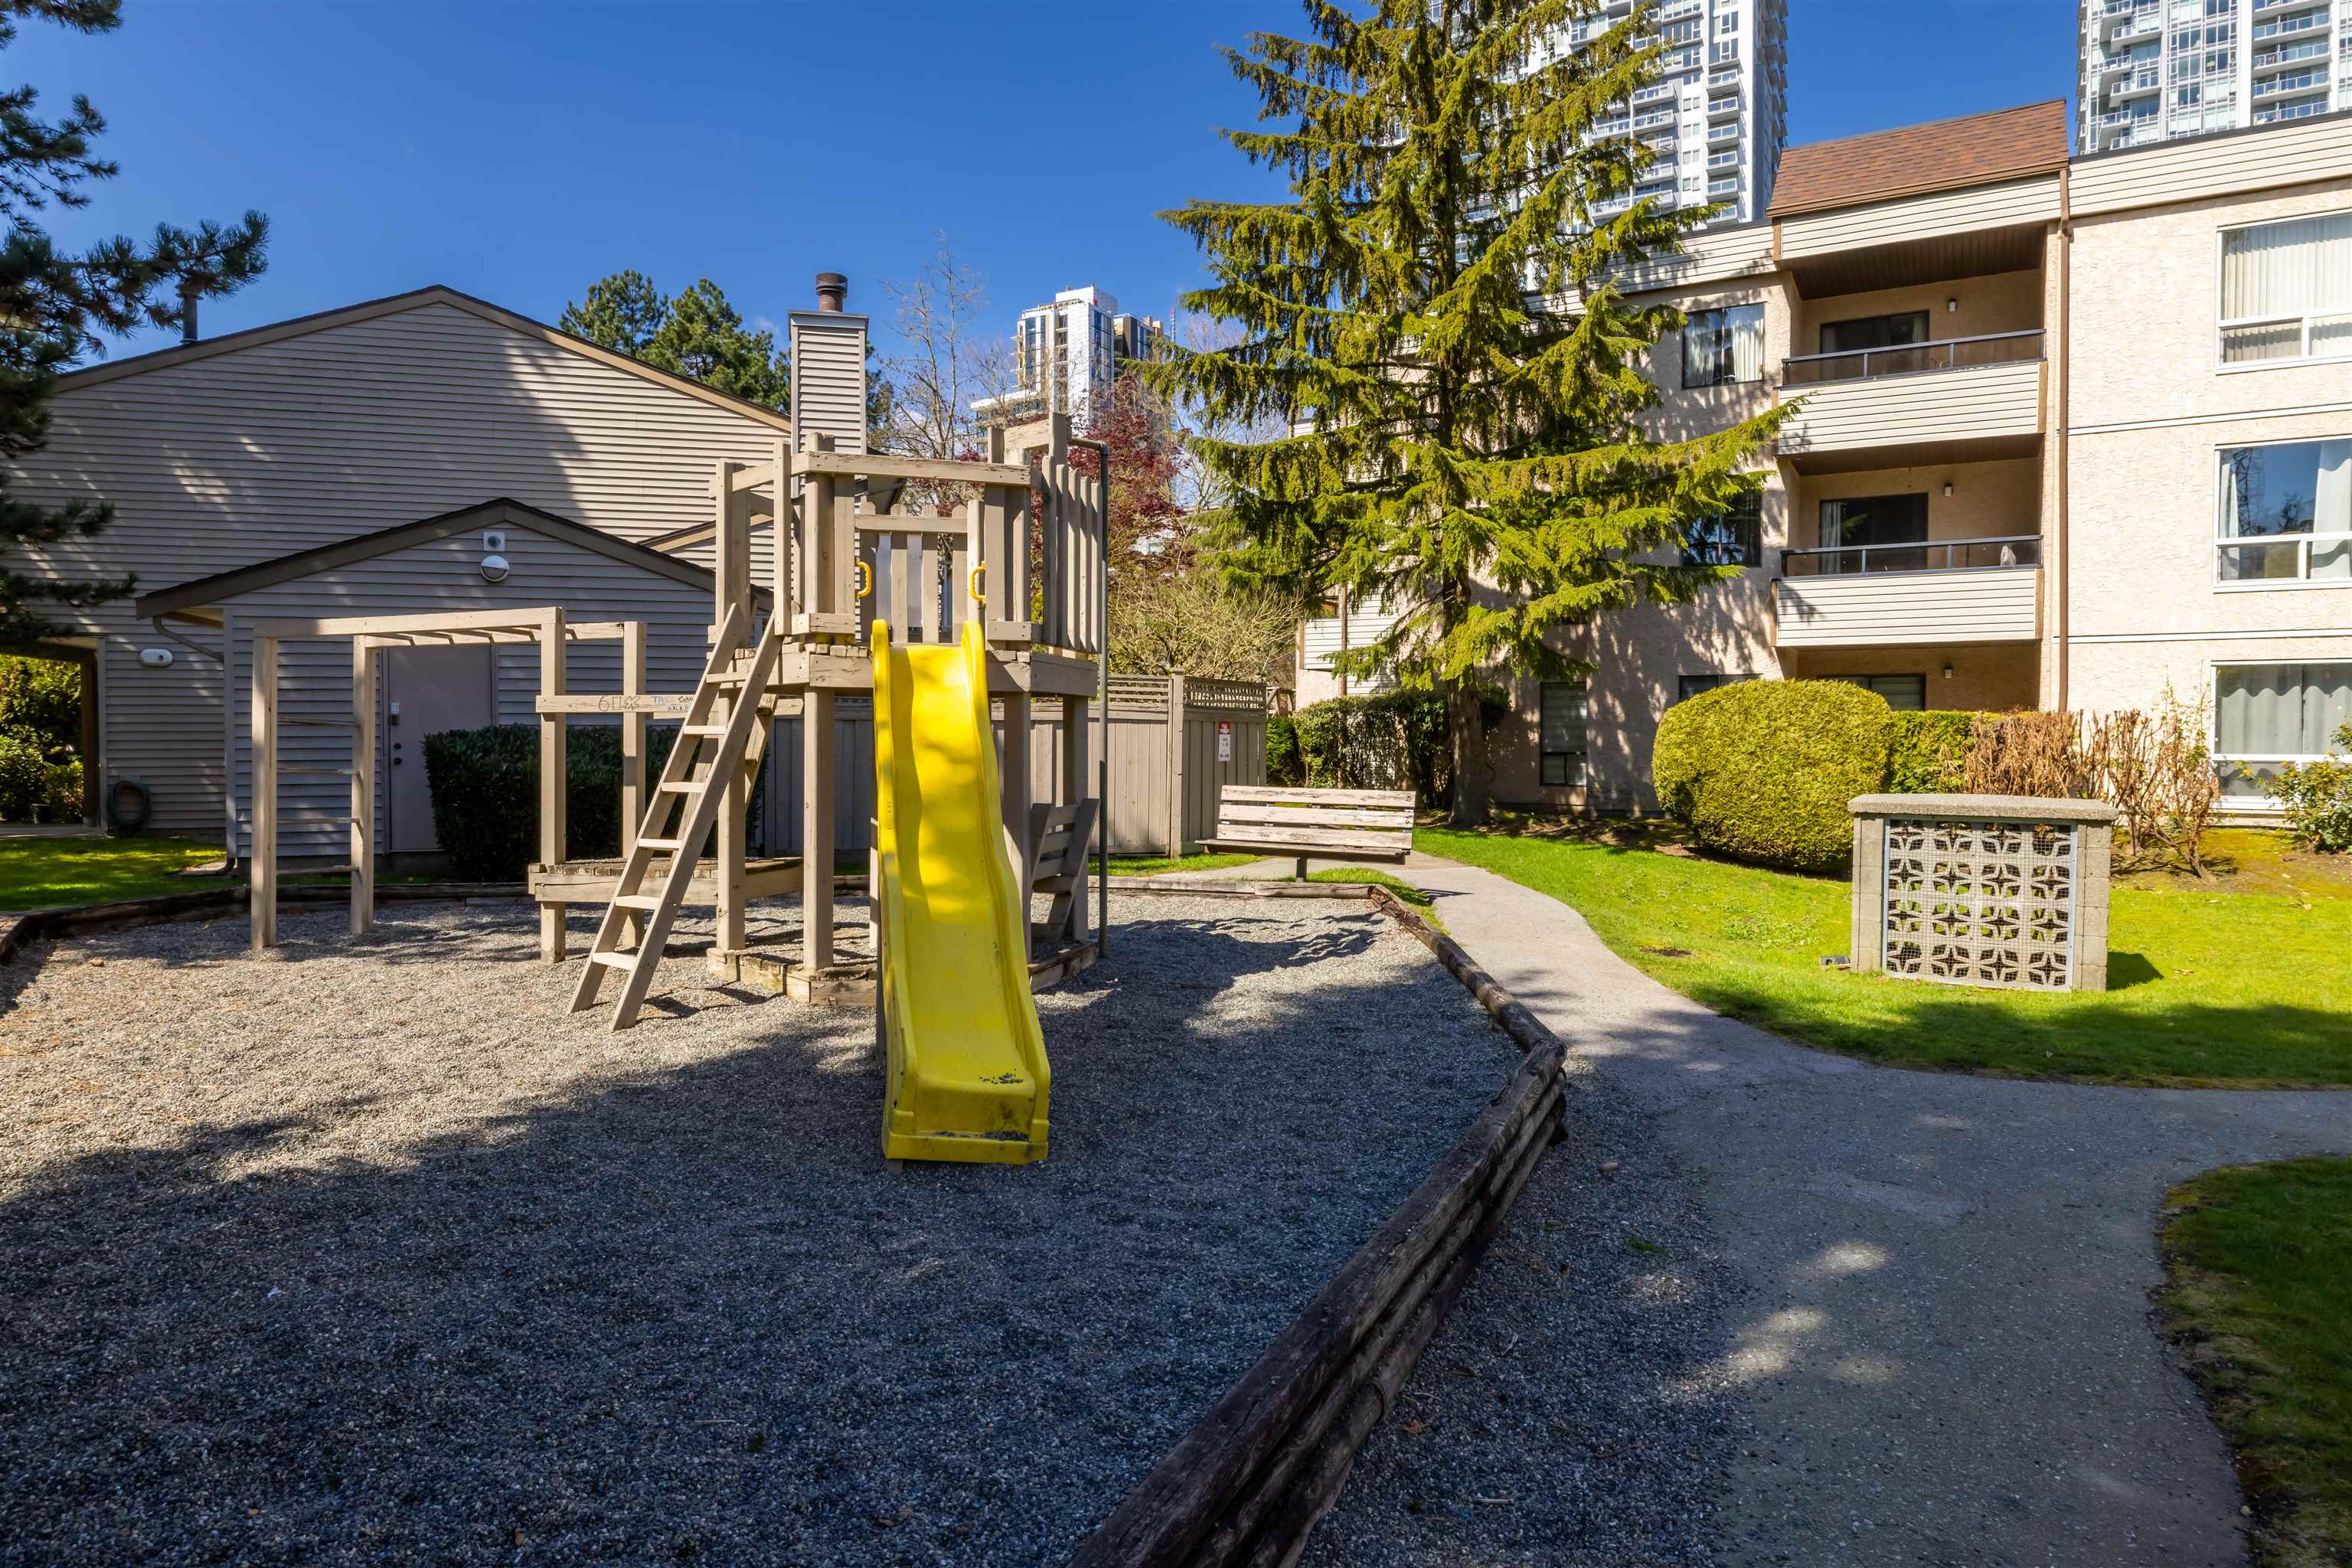 13344 102A, Surrey, British Columbia V3T 5J7, 1 Bedroom Bedrooms, ,1 BathroomBathrooms,Residential Attached,For Sale,102A,R2871713